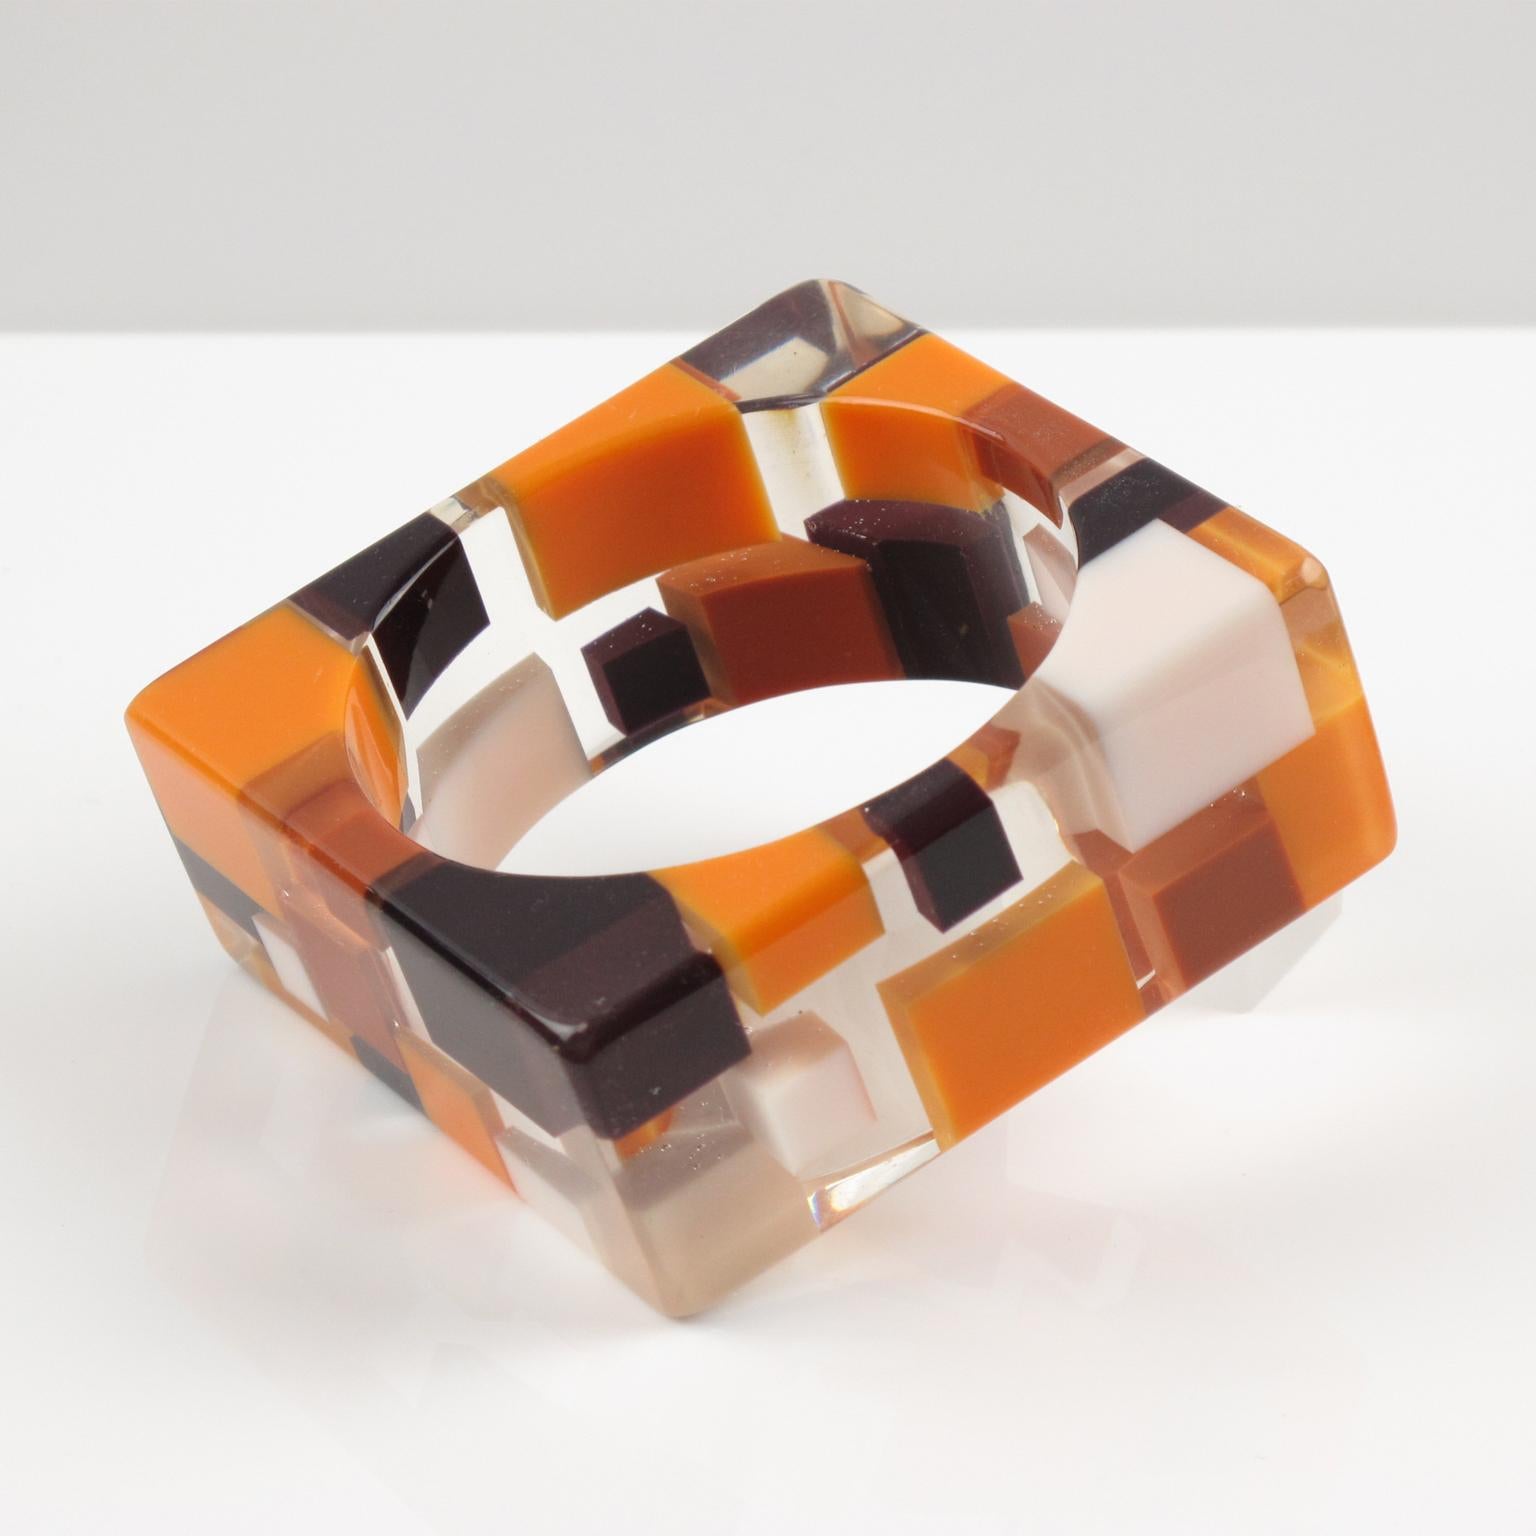 Lovely chunky extra wide geometric Lucite bracelet bangle. Oversized square carved shape with colorful checkerboard inclusions. Build on a crystal clear background with imbedded geometric elements in assorted colors of orange, brown, white and